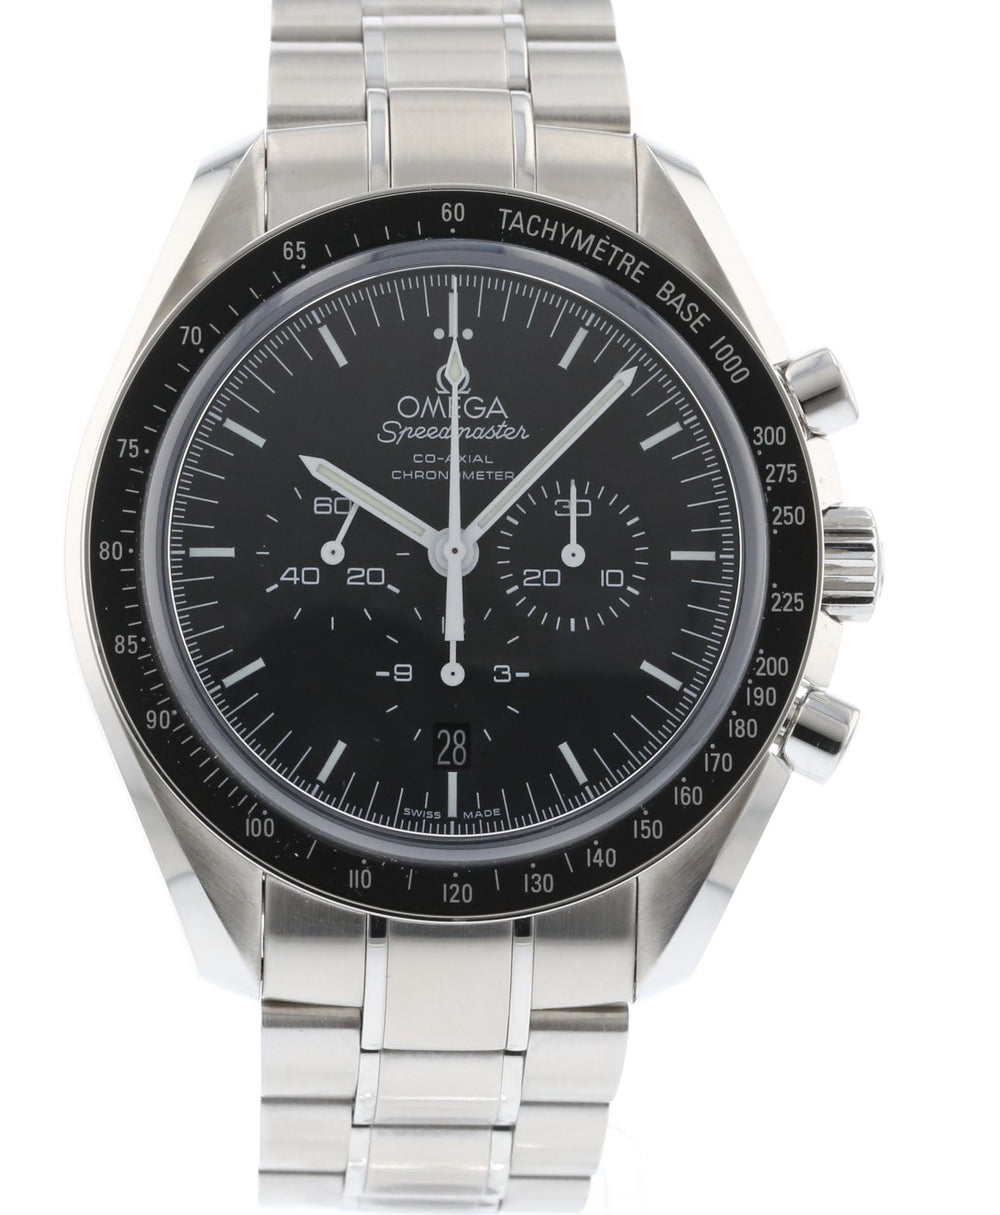 OMEGA Speedmaster Moonwatch Co-Axial Chronograph 311.30.44.50.01.002 1